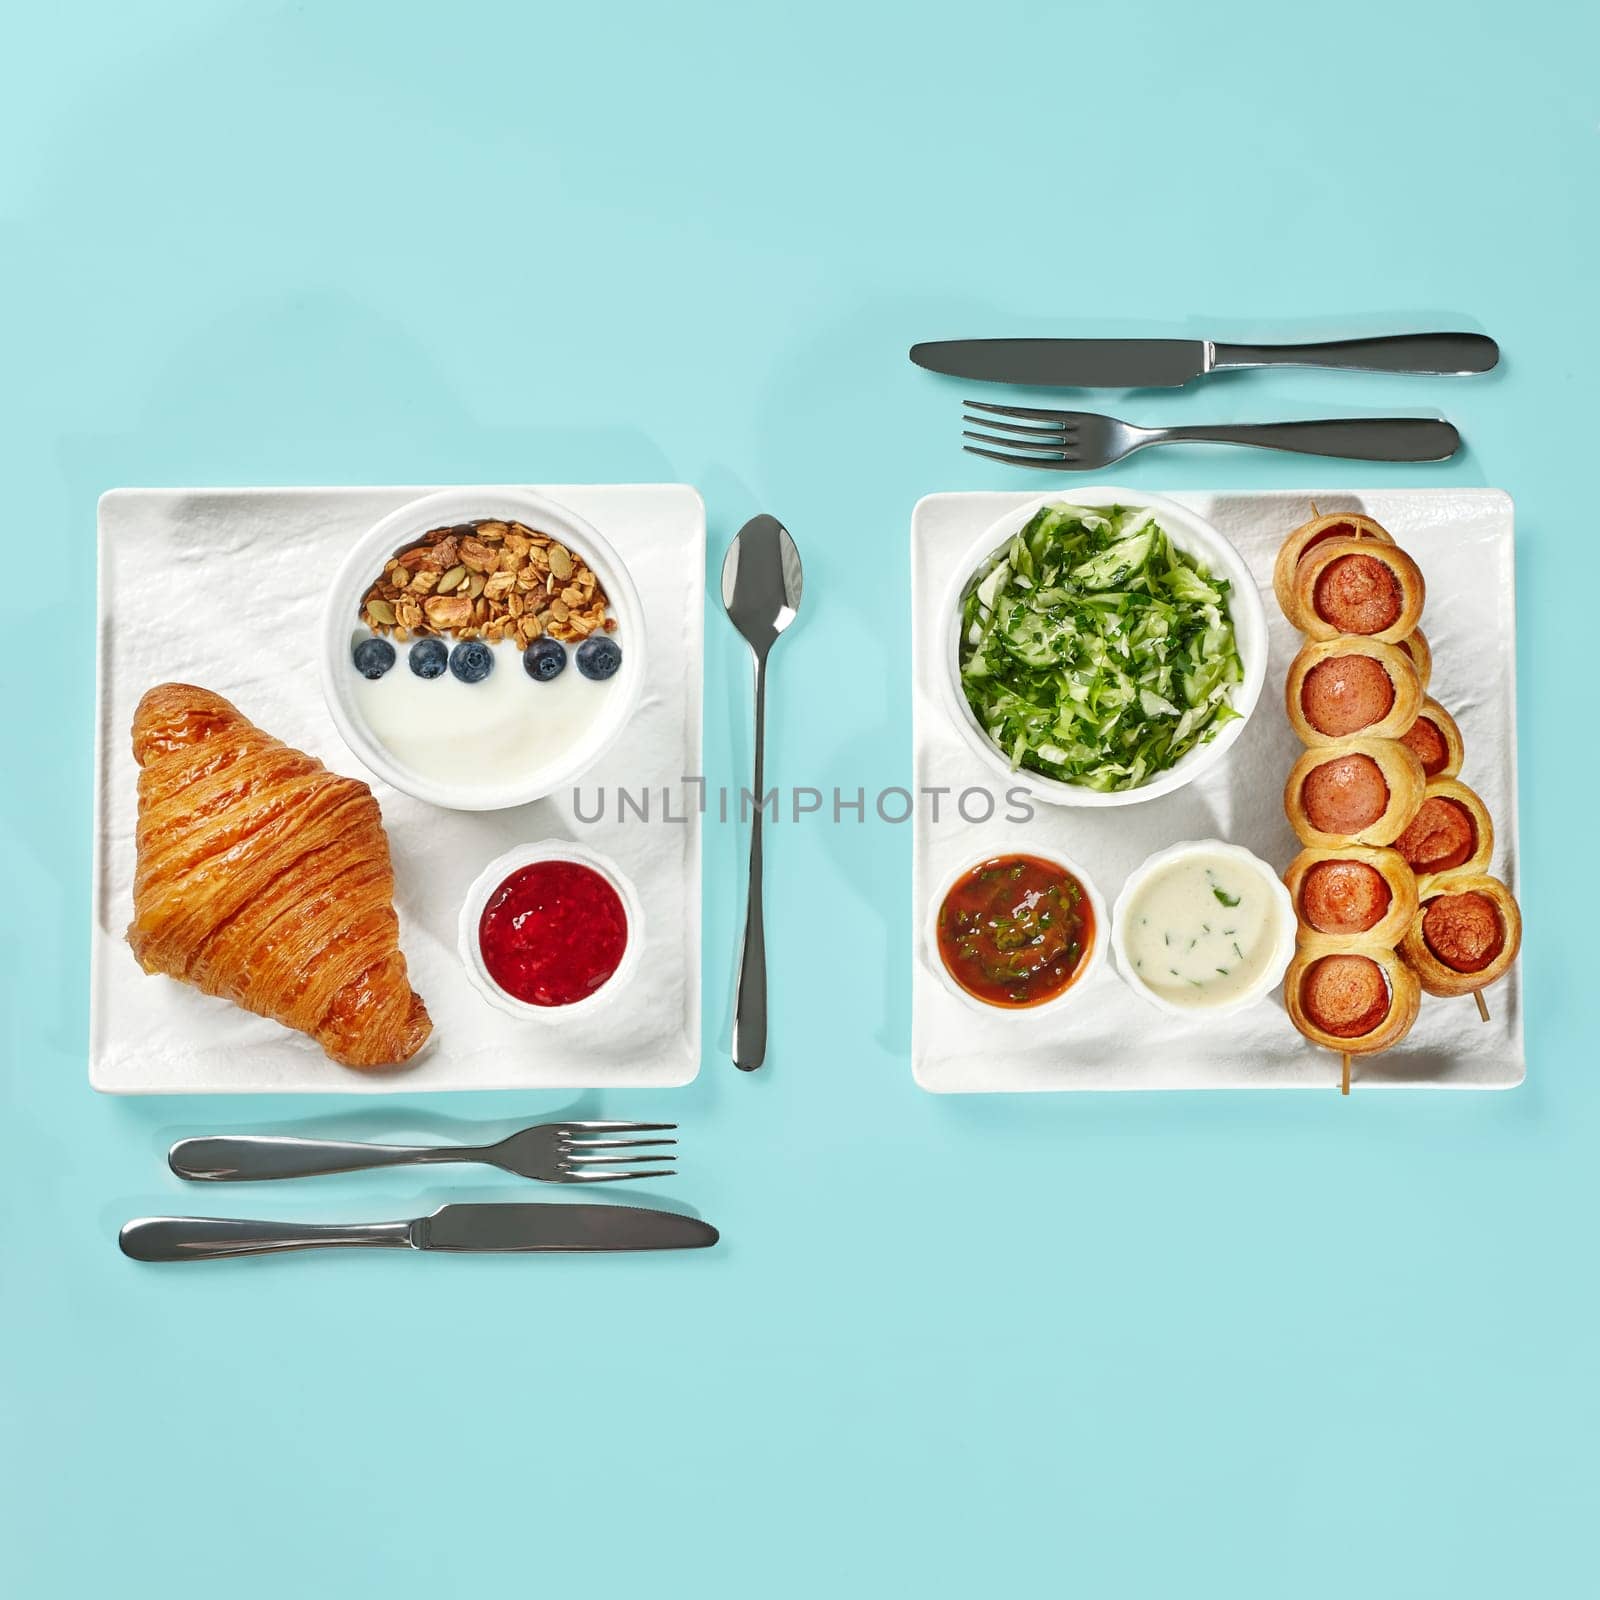 Two breakfast choices presented side by side: continental set with croissant, yogurt, granola and jam, and American set with pigs in blanket salad and dips on white trays on blue background